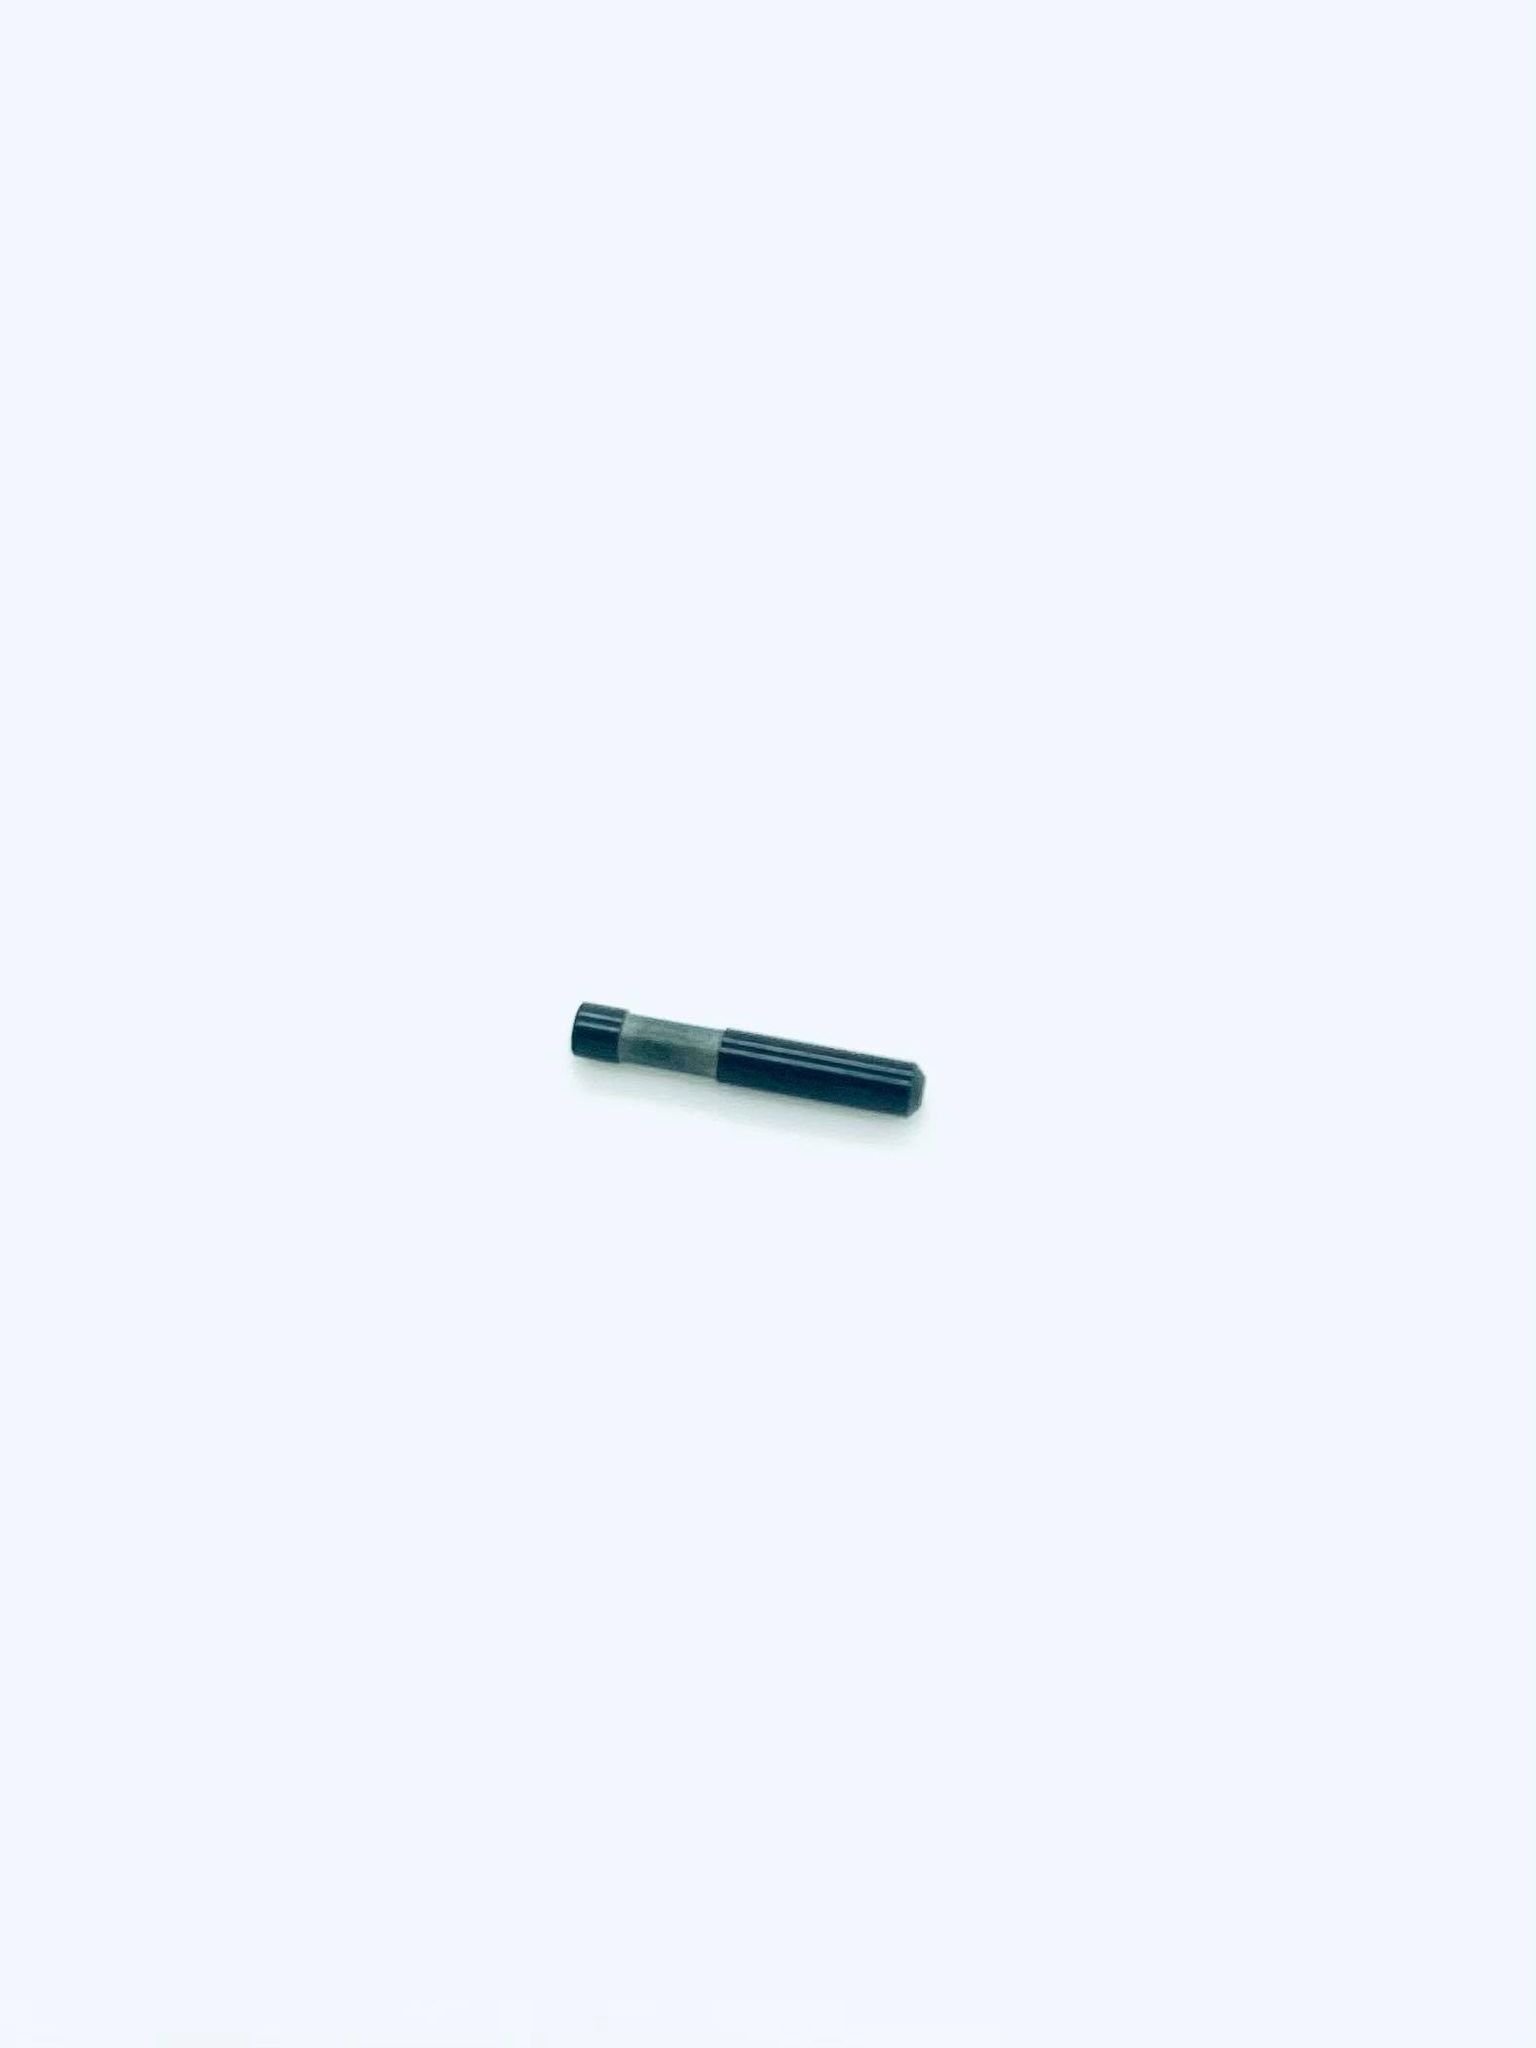 Extractor pin, P210